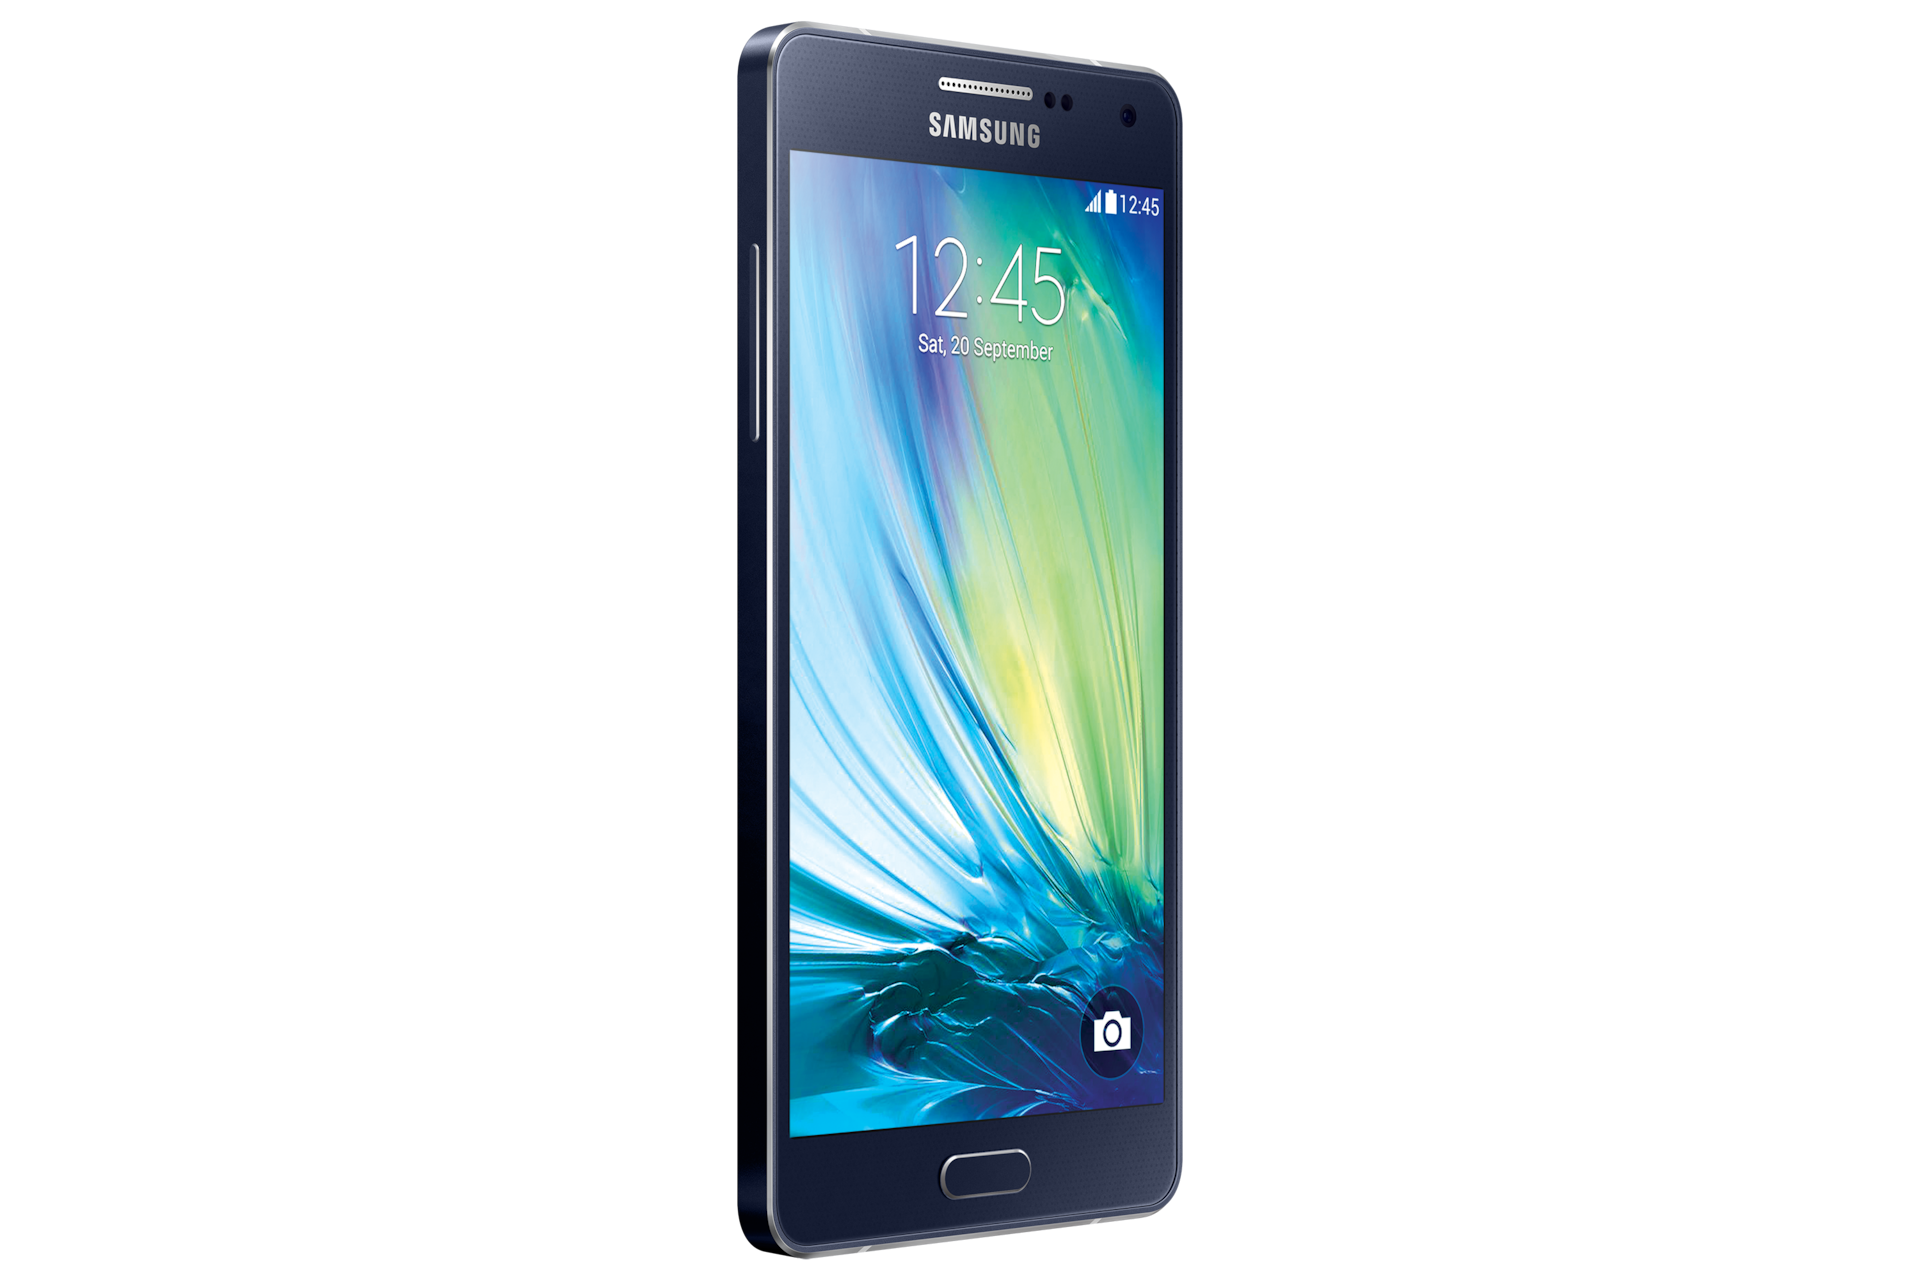 Samsung Galaxy A5 Price India, Galaxy A5 Metal 5 Inch Smartphone Features, Specs3000 x 2000